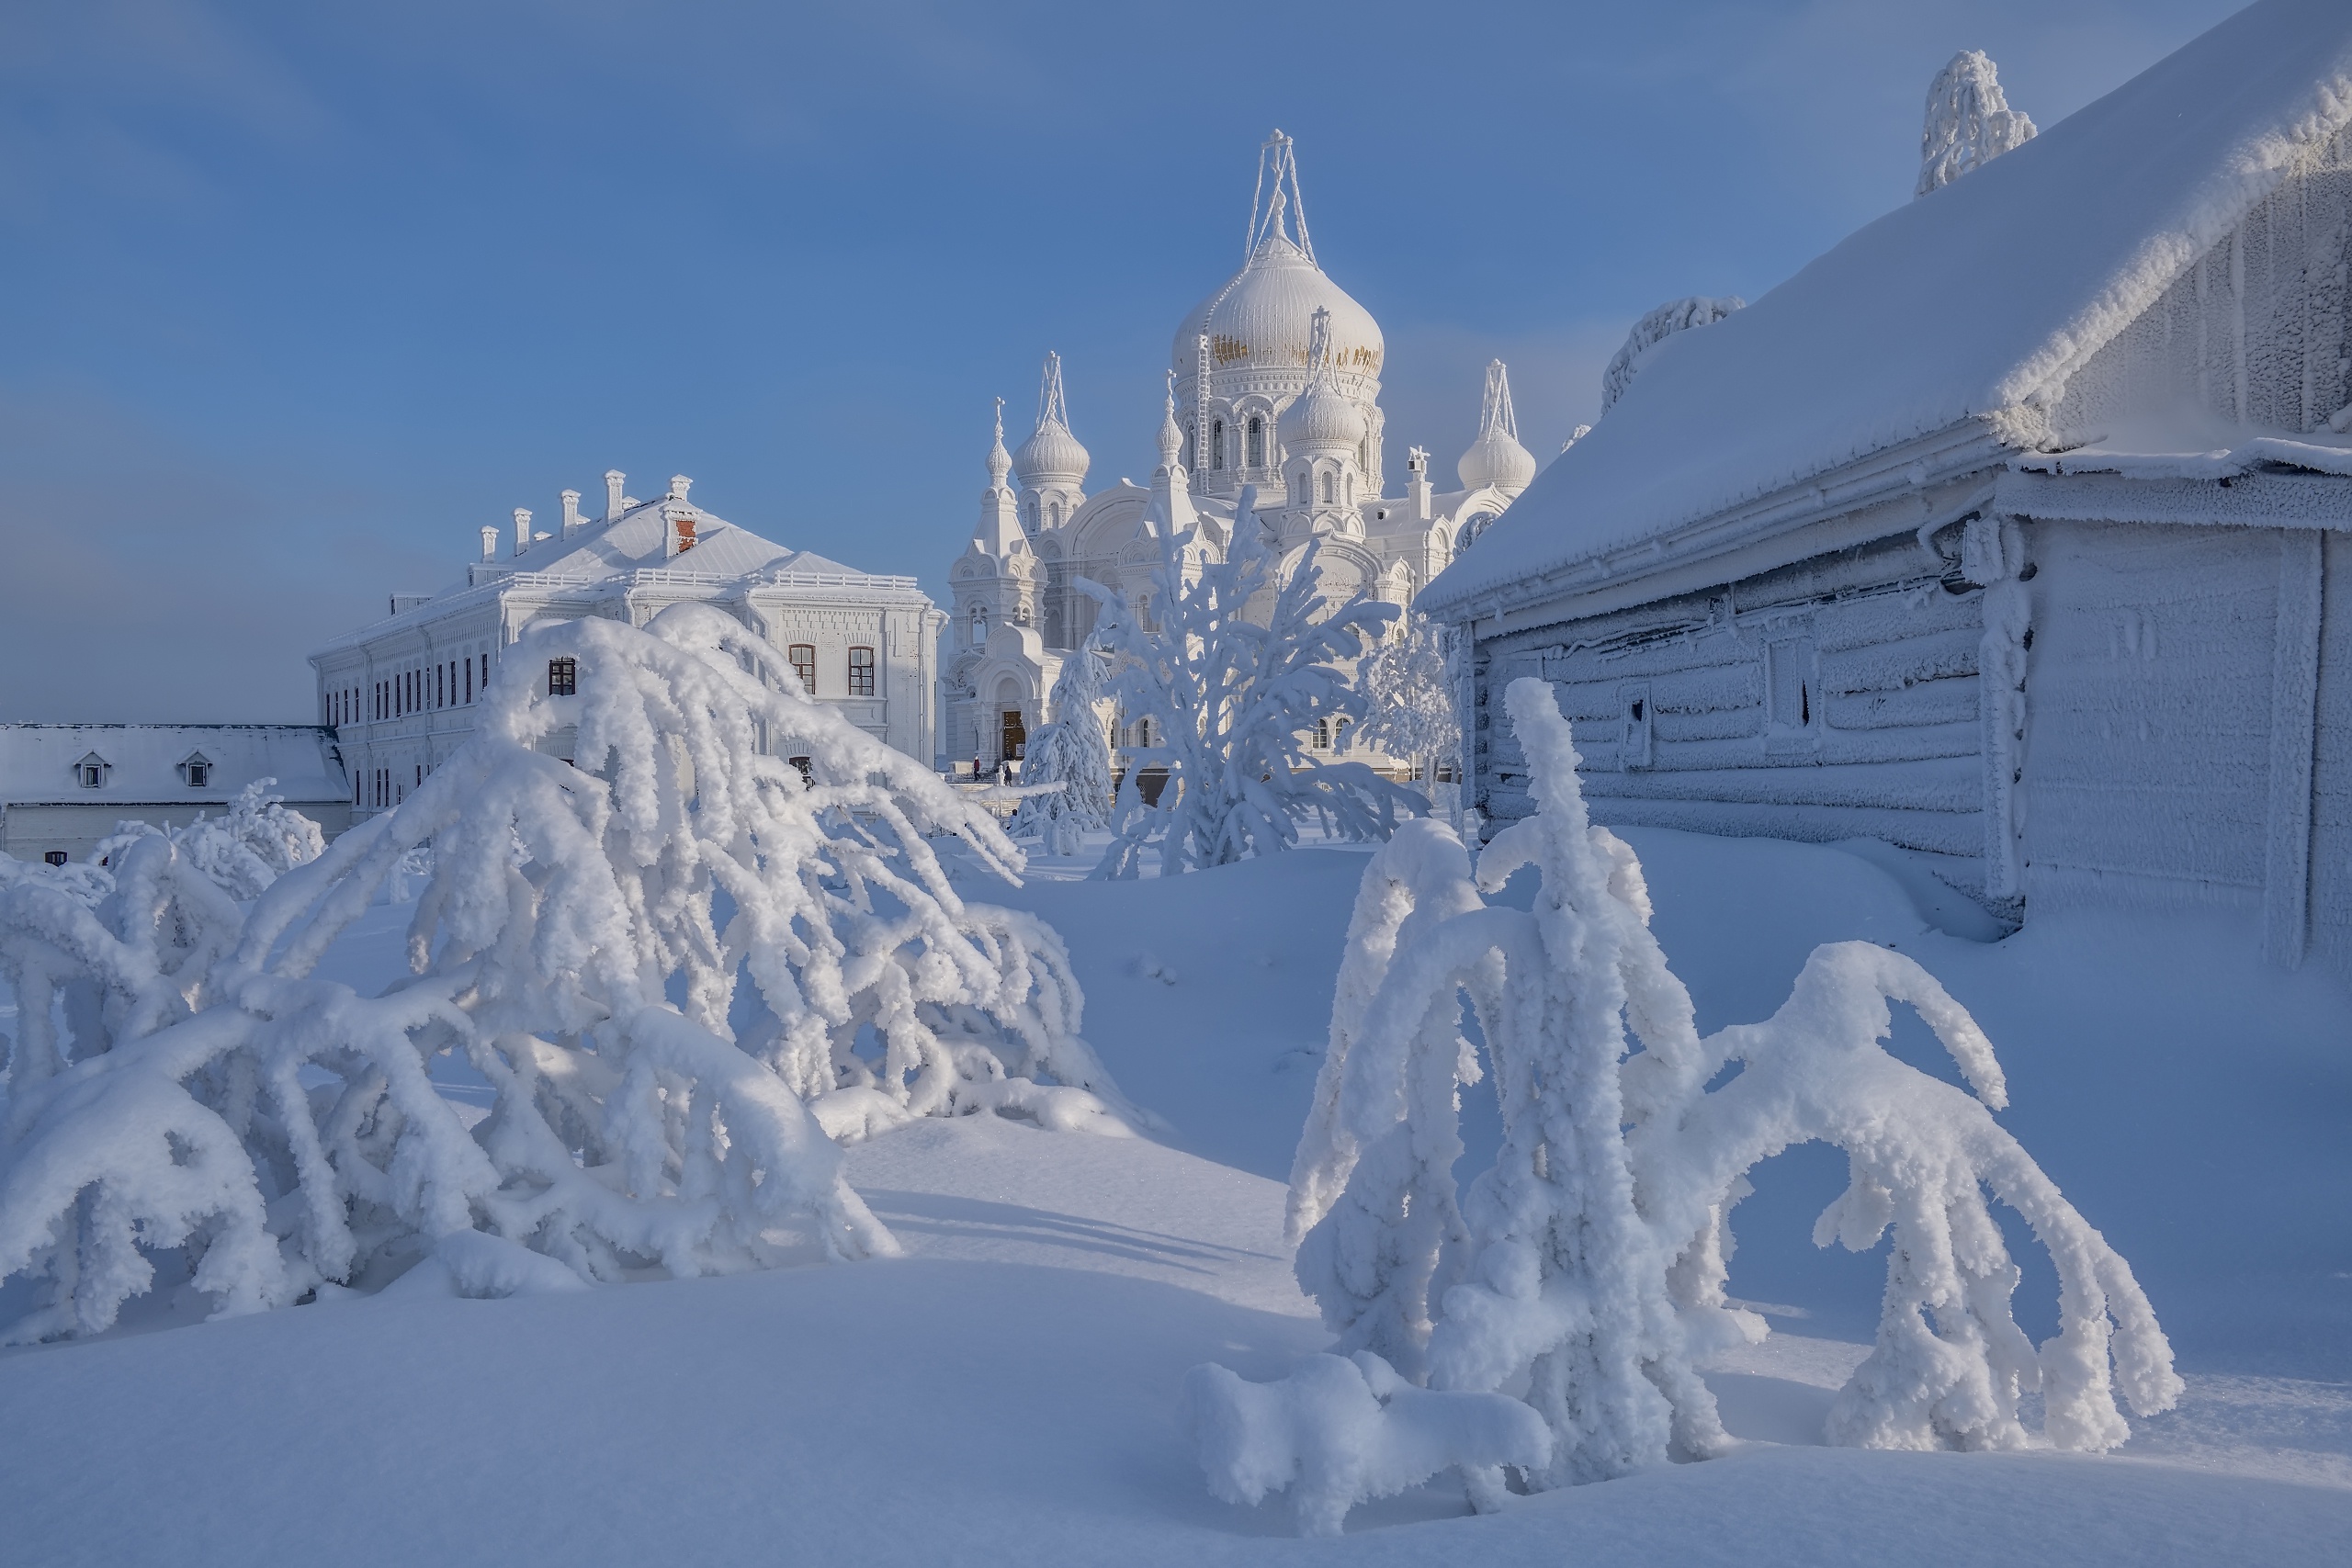 General 2560x1707 Ural winter cold building snow ice Russia monastery Monastery Belogorsky outdoors